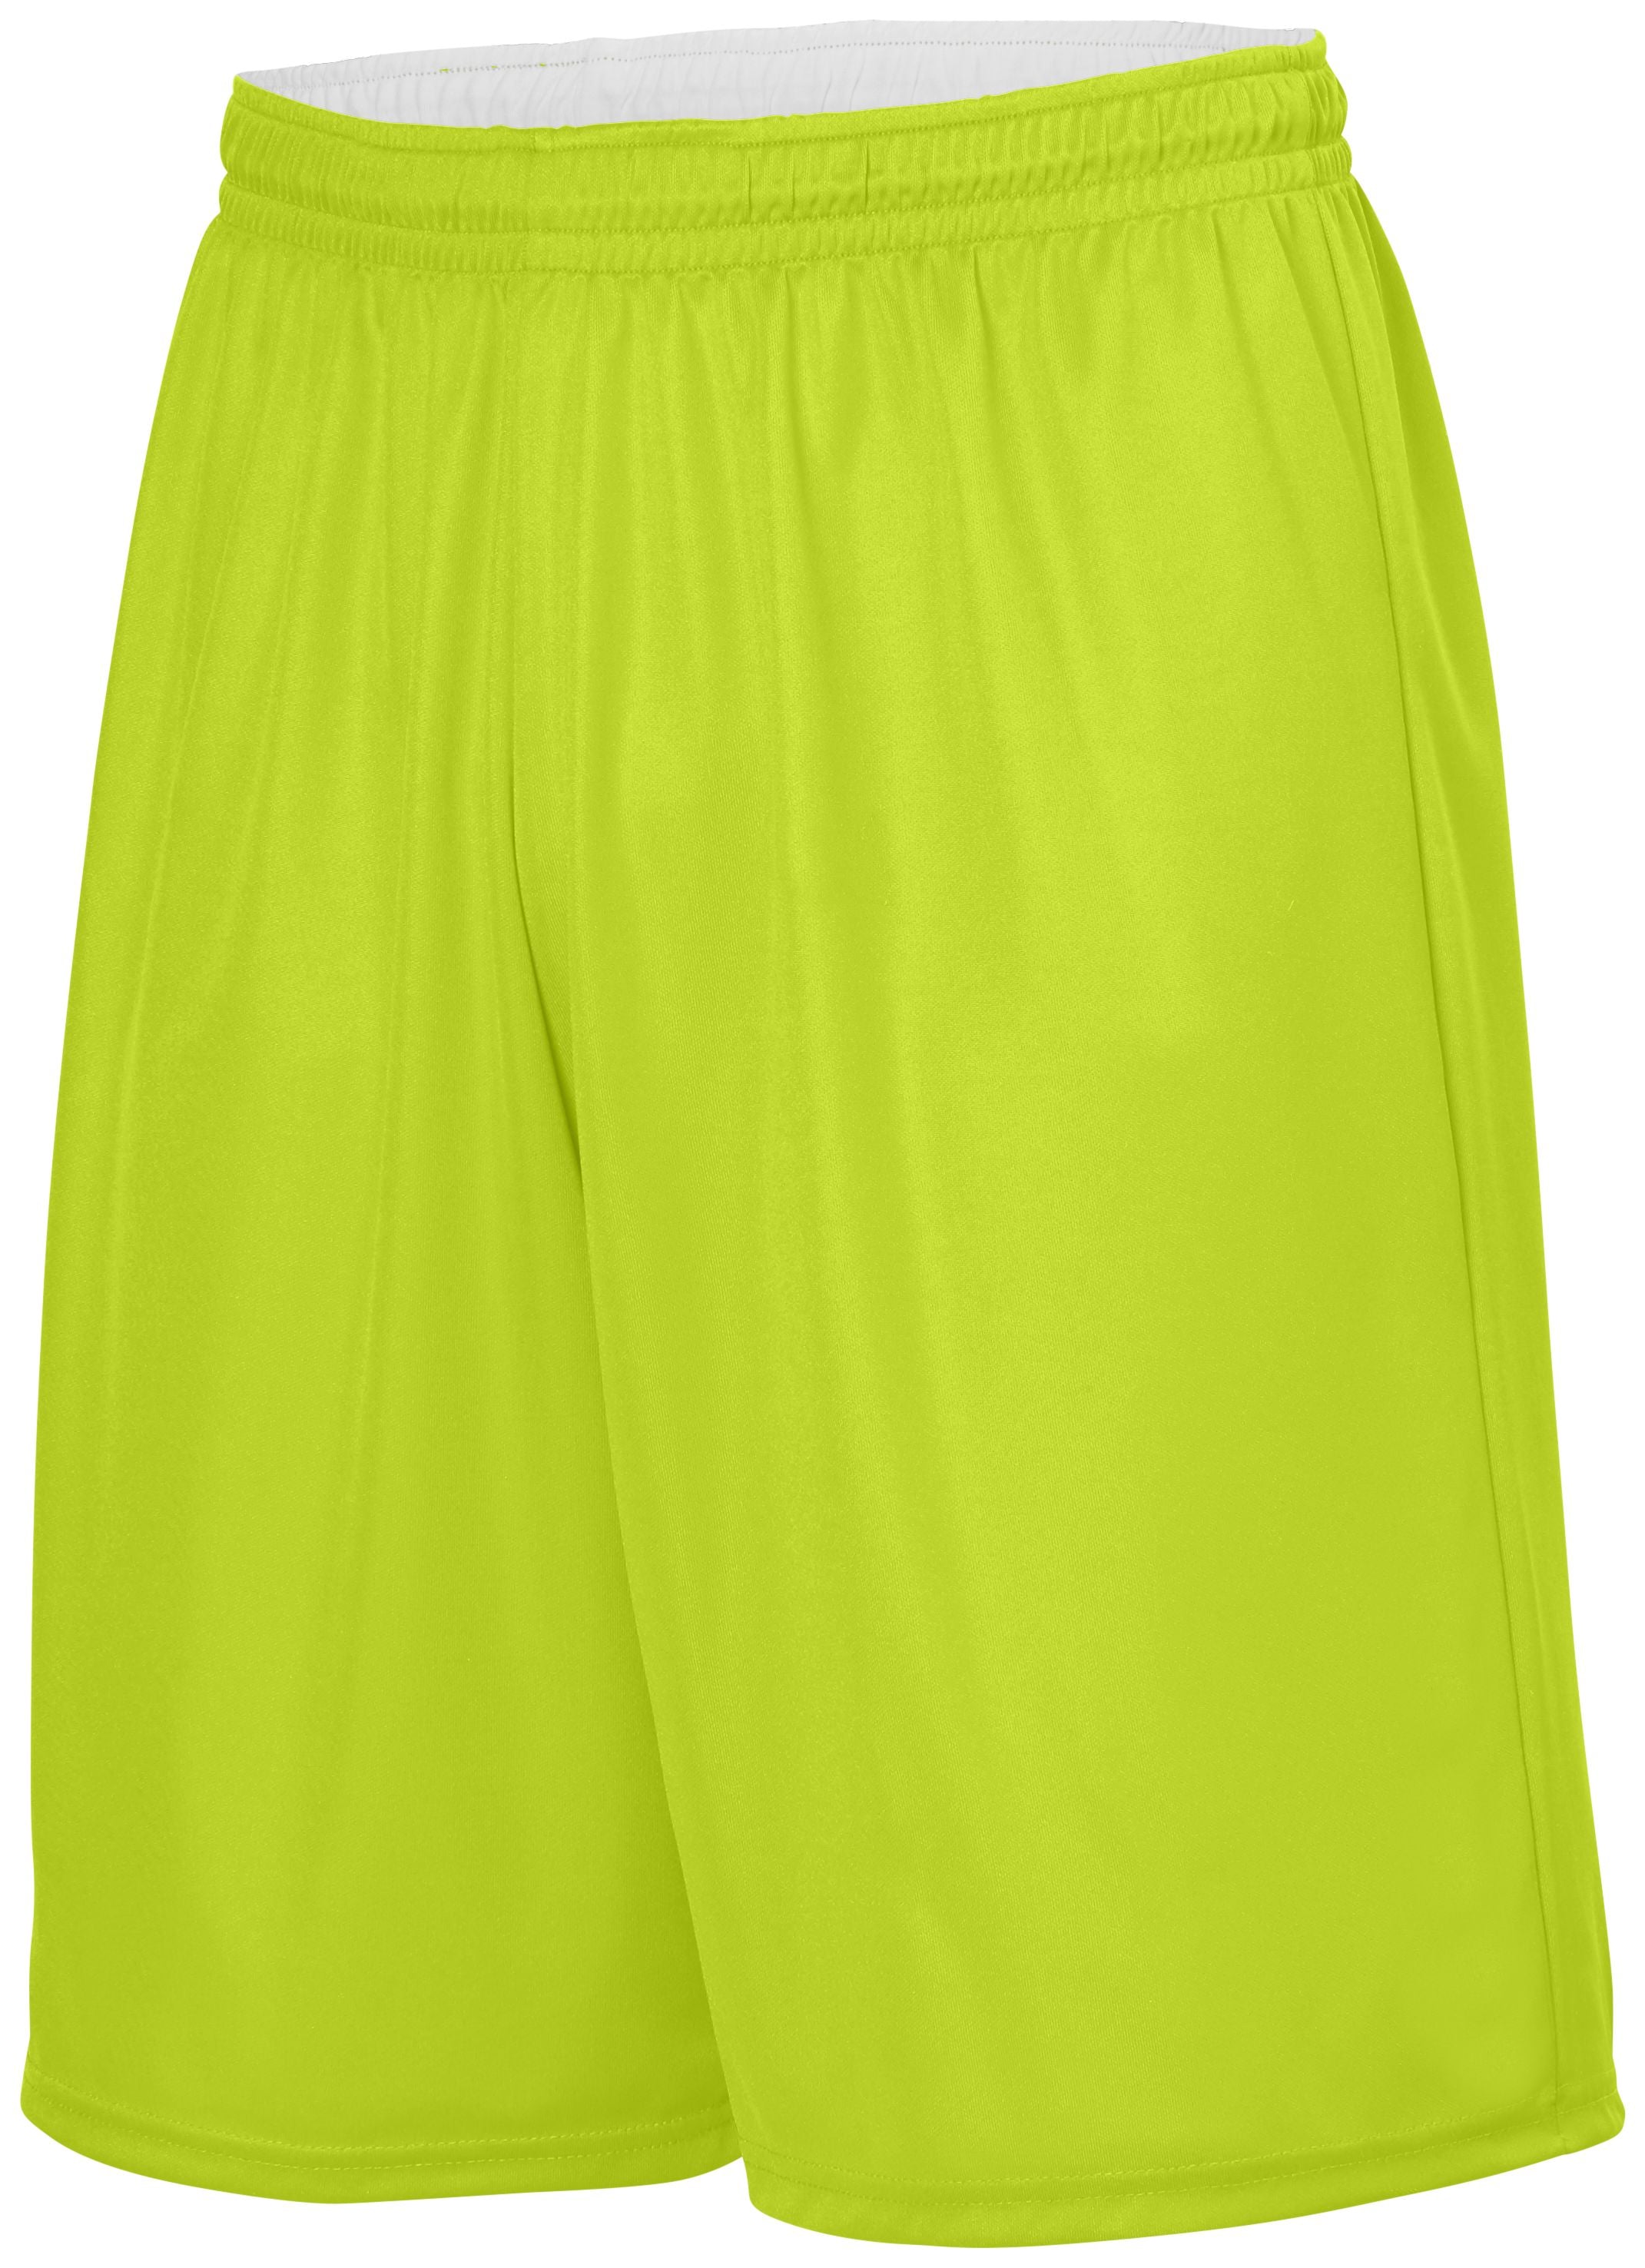 Augusta Sportswear Youth Reversible Wicking Shorts in Lime/White  -Part of the Youth, Youth-Shorts, Augusta-Products, Basketball, All-Sports, All-Sports-1 product lines at KanaleyCreations.com